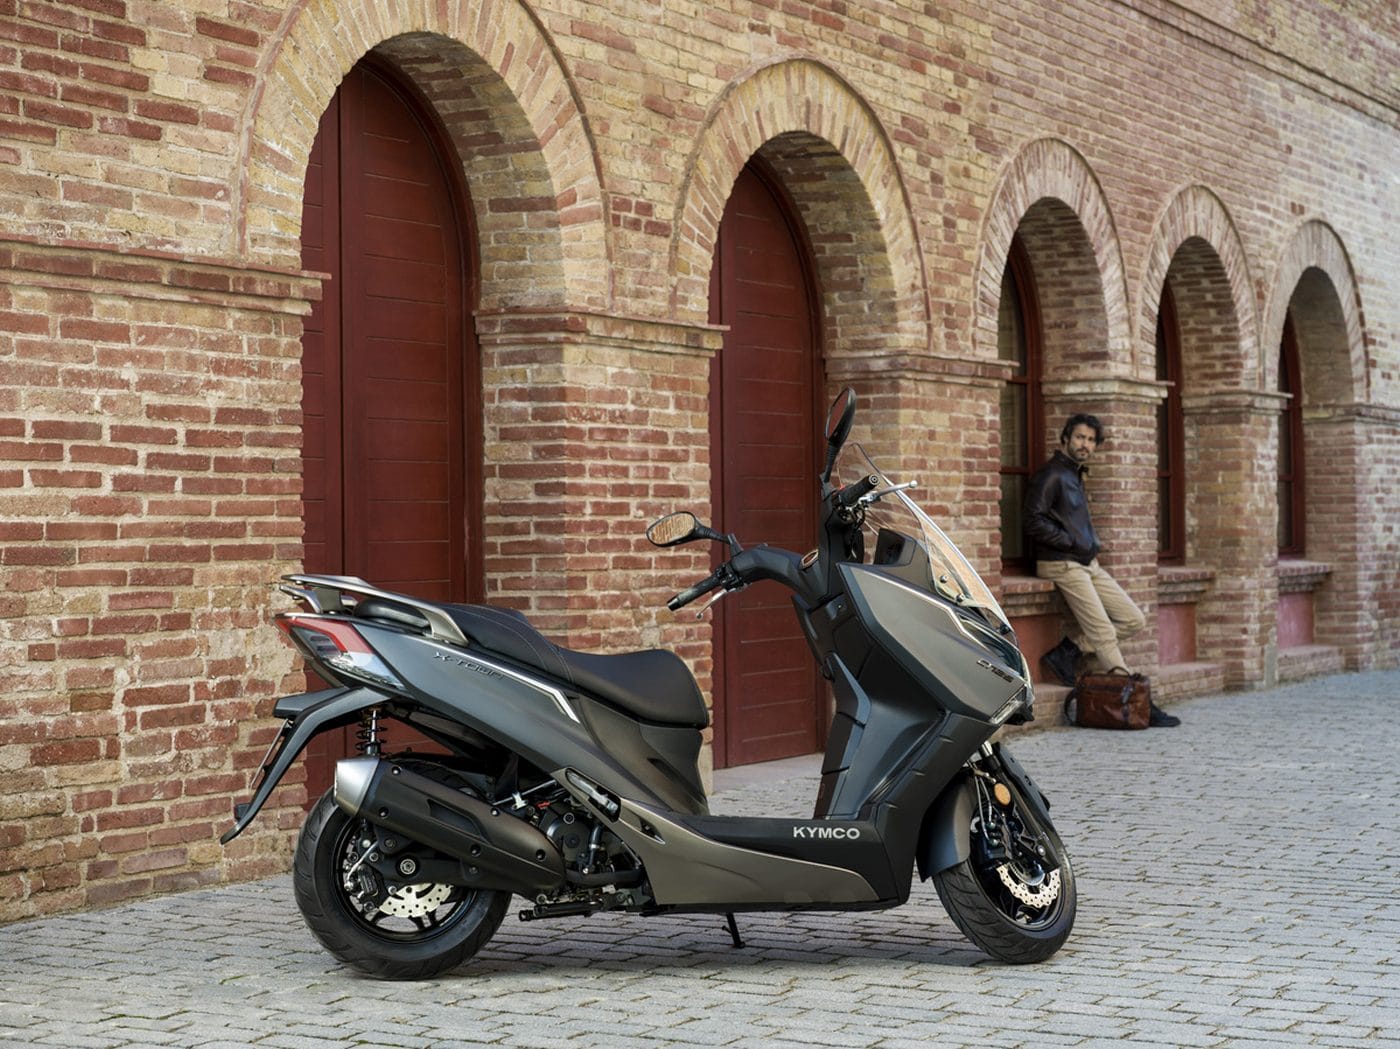 New Kymco X-Town CT 125, on sale in January